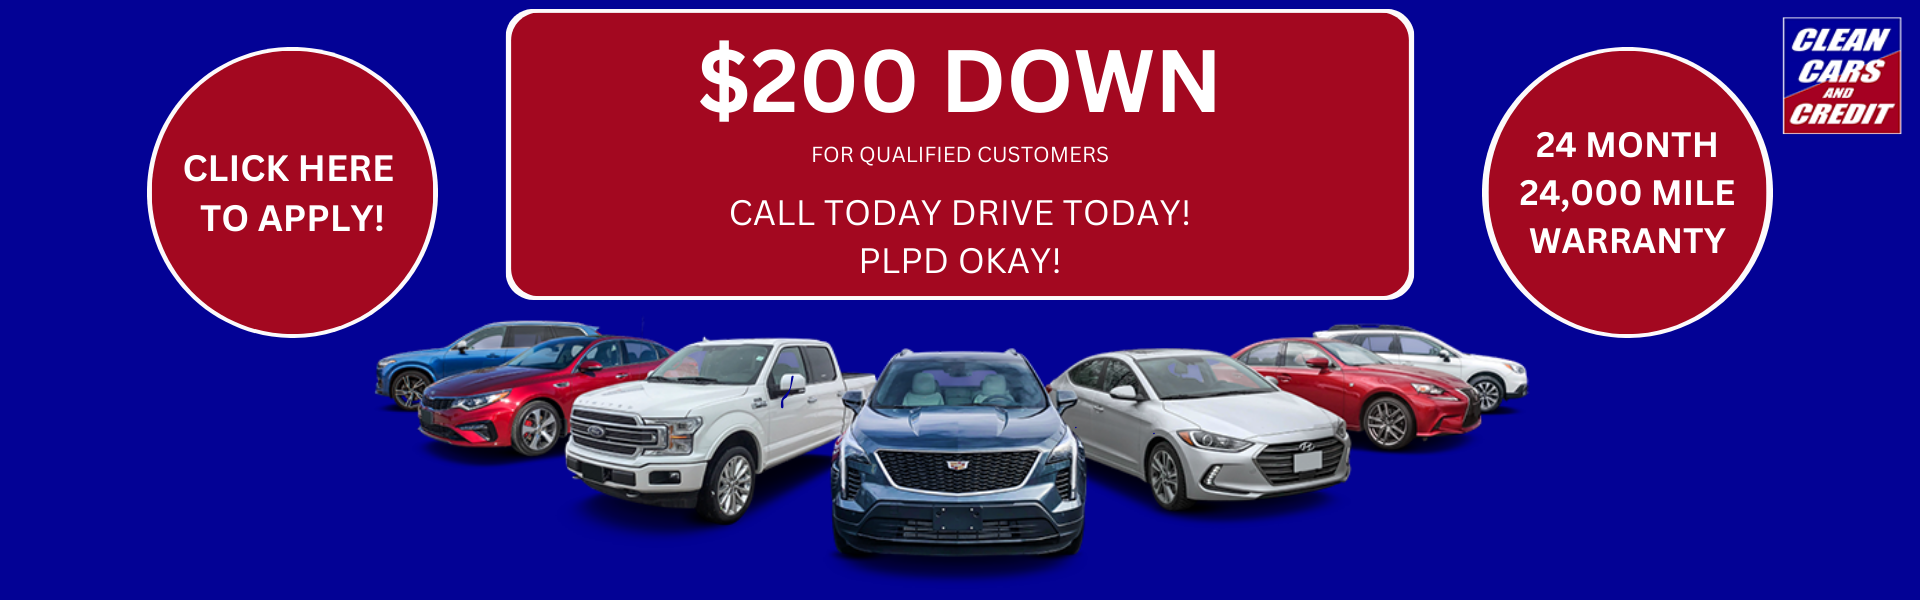 $200 down for qualified customers click to apply